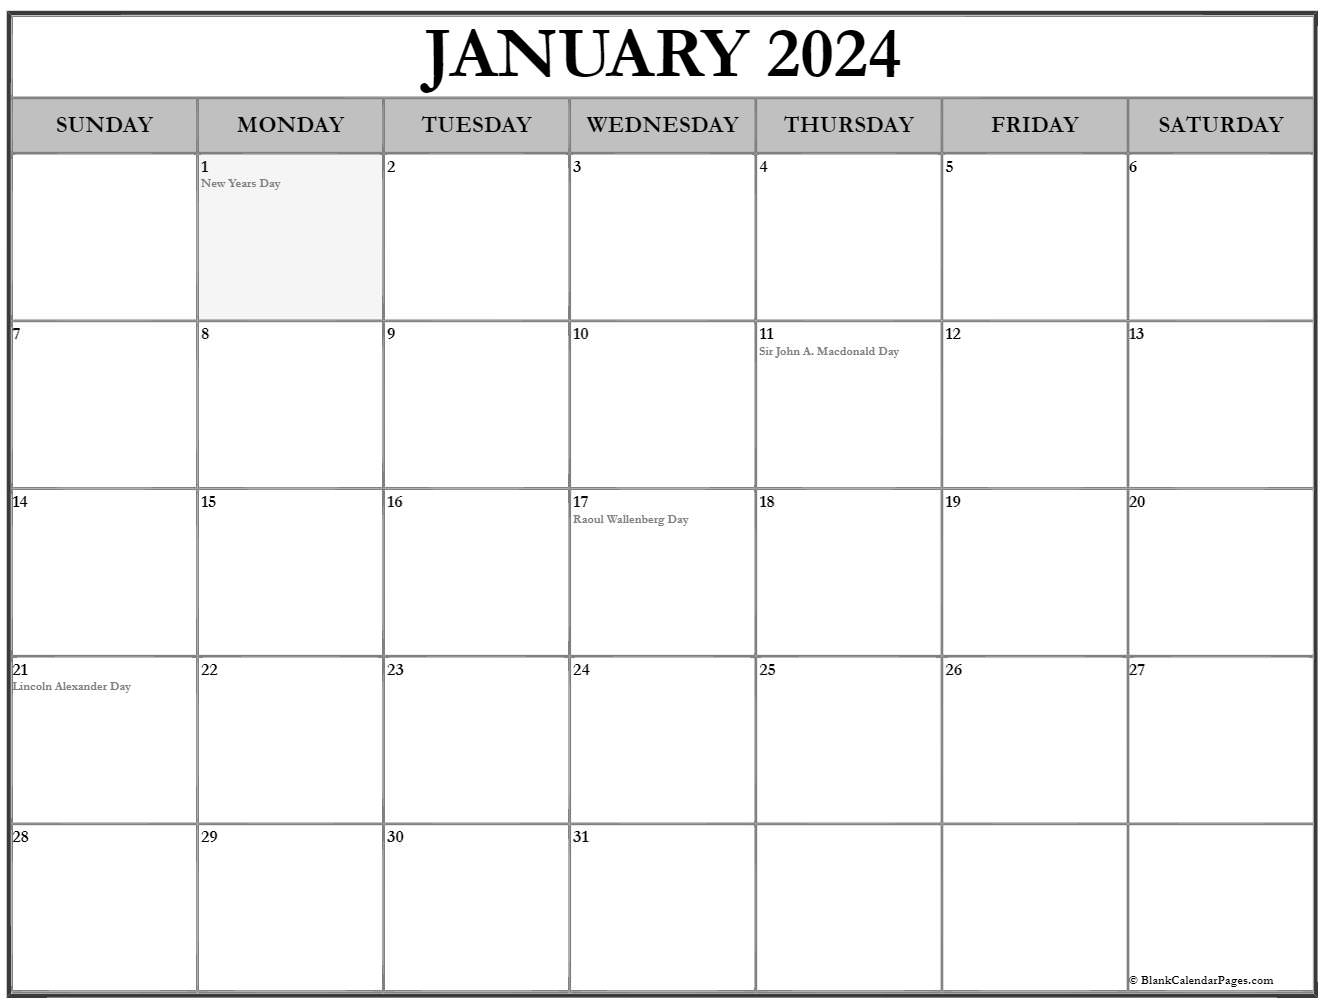 picture-of-january-2024-calendar-new-amazing-famous-january-2024